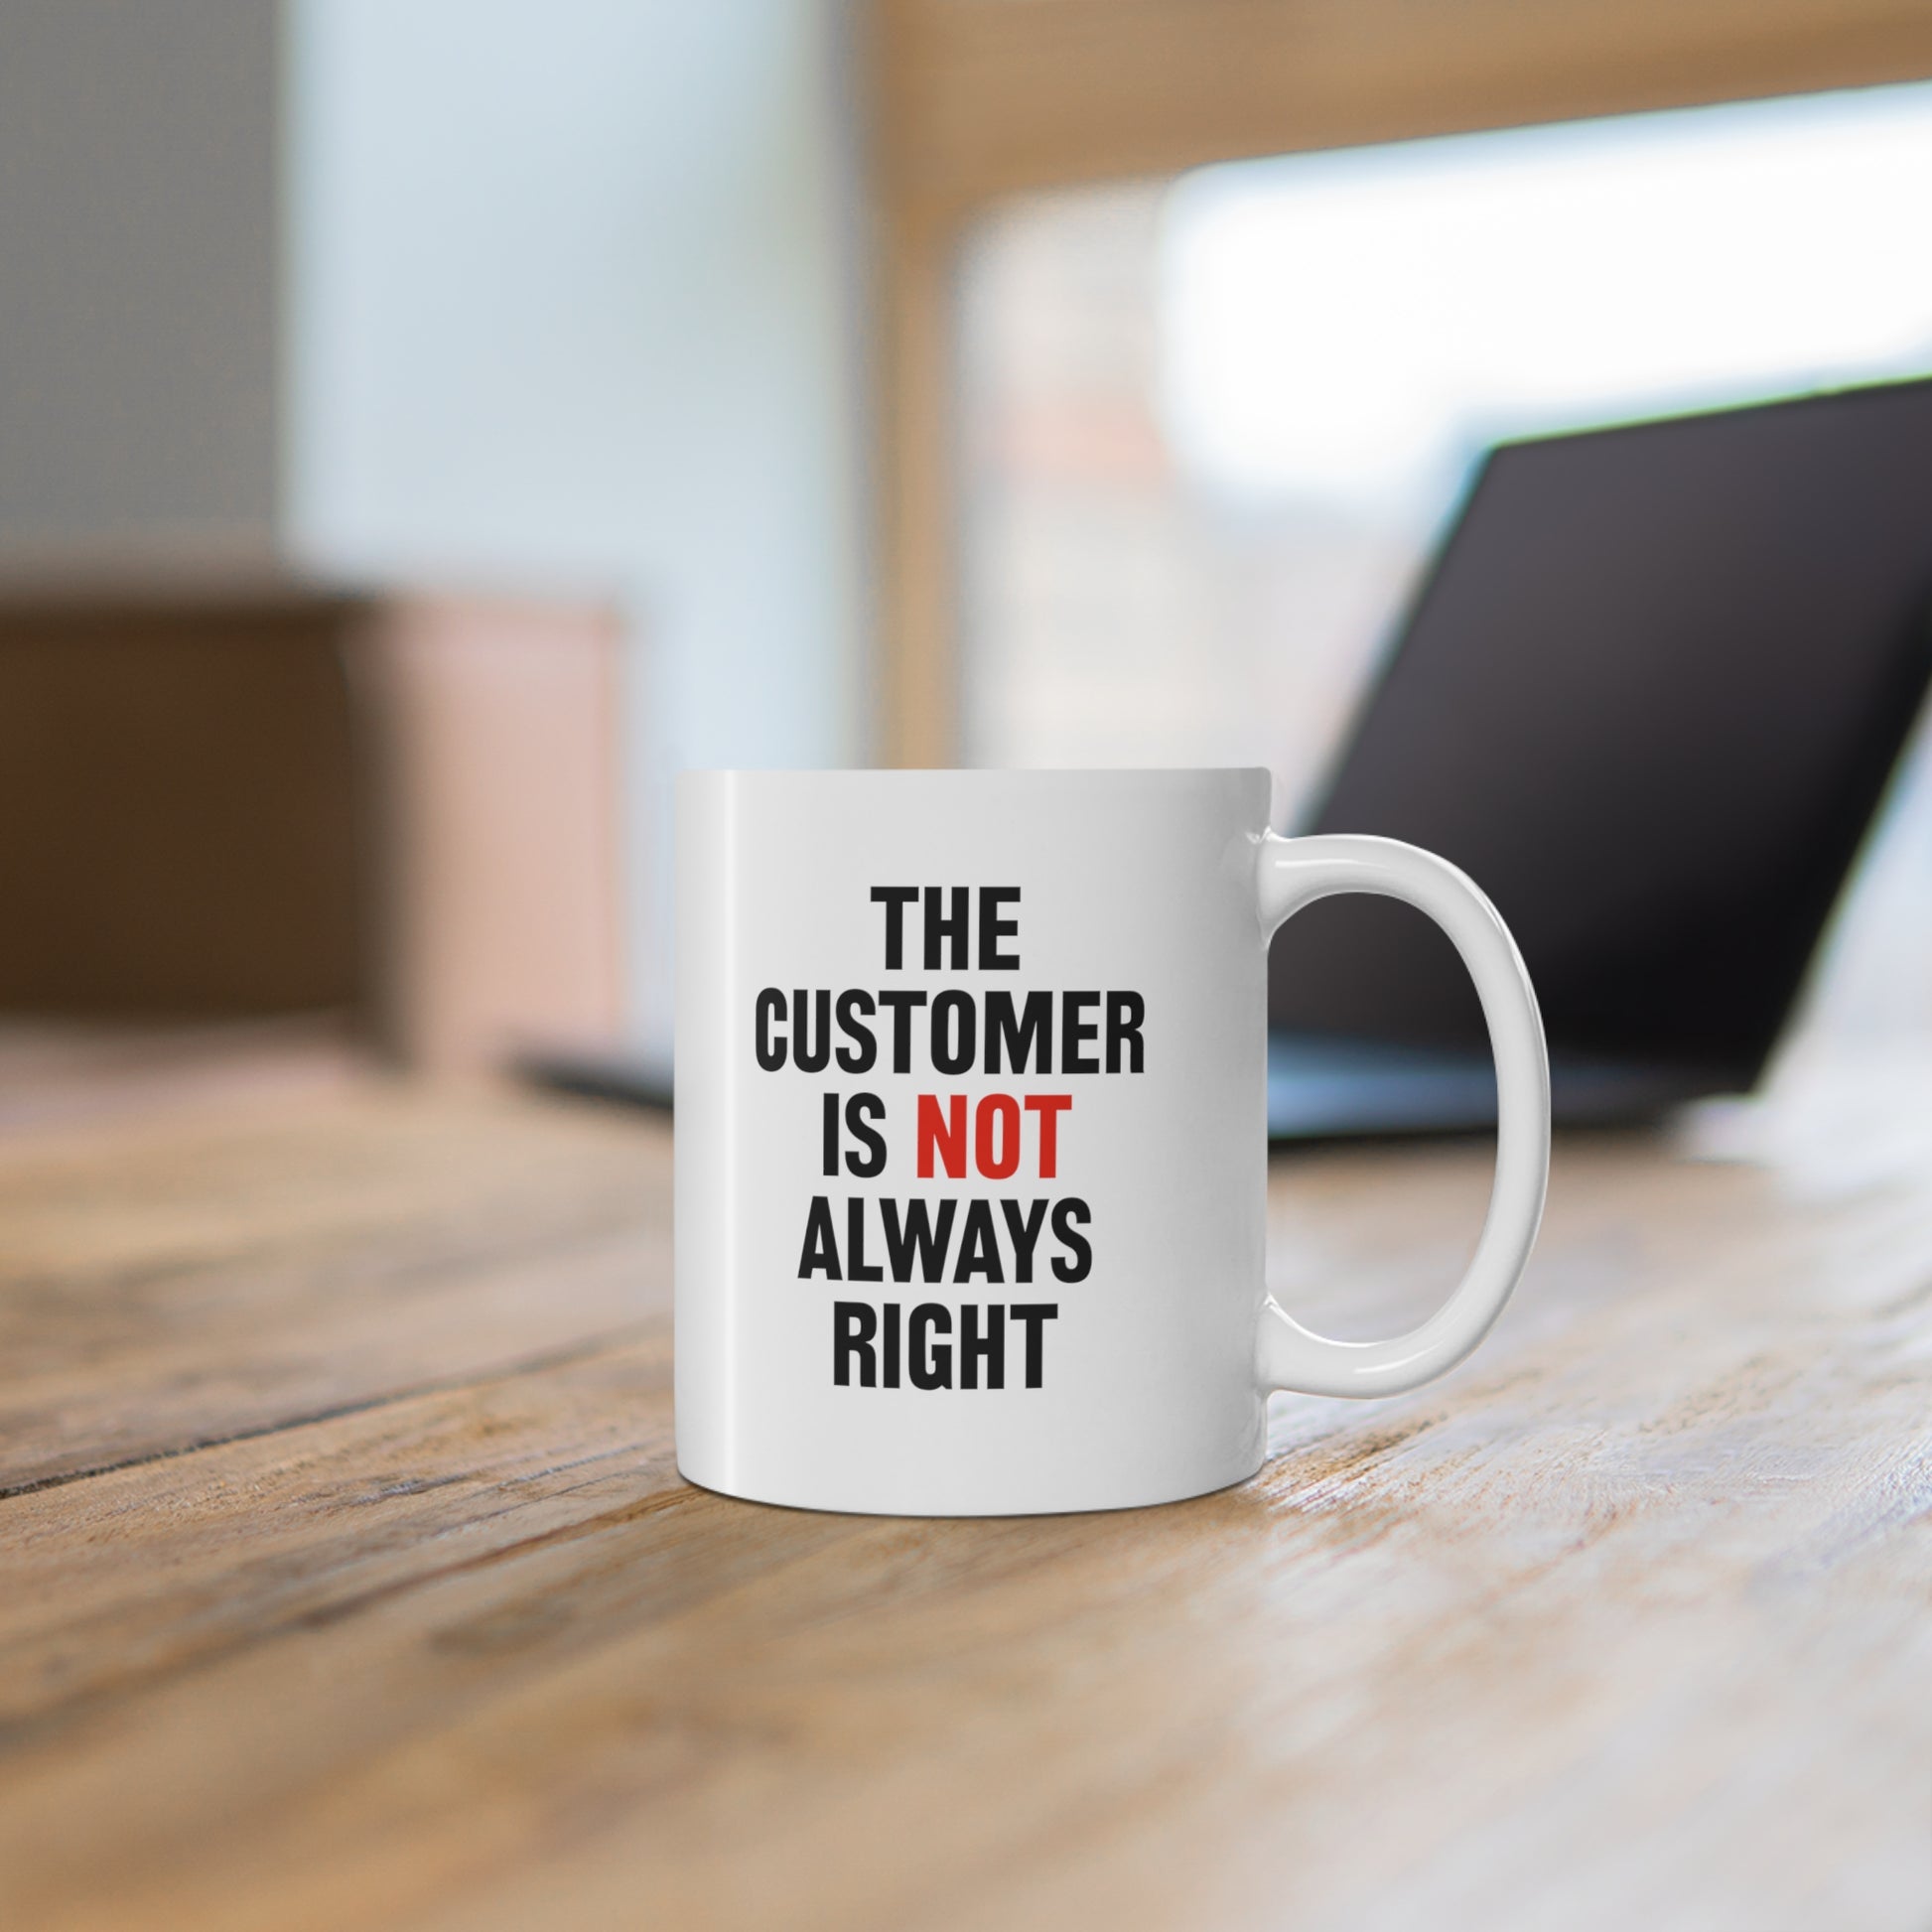 11oz ceramic mug with quote The Customer Is Not Always Right